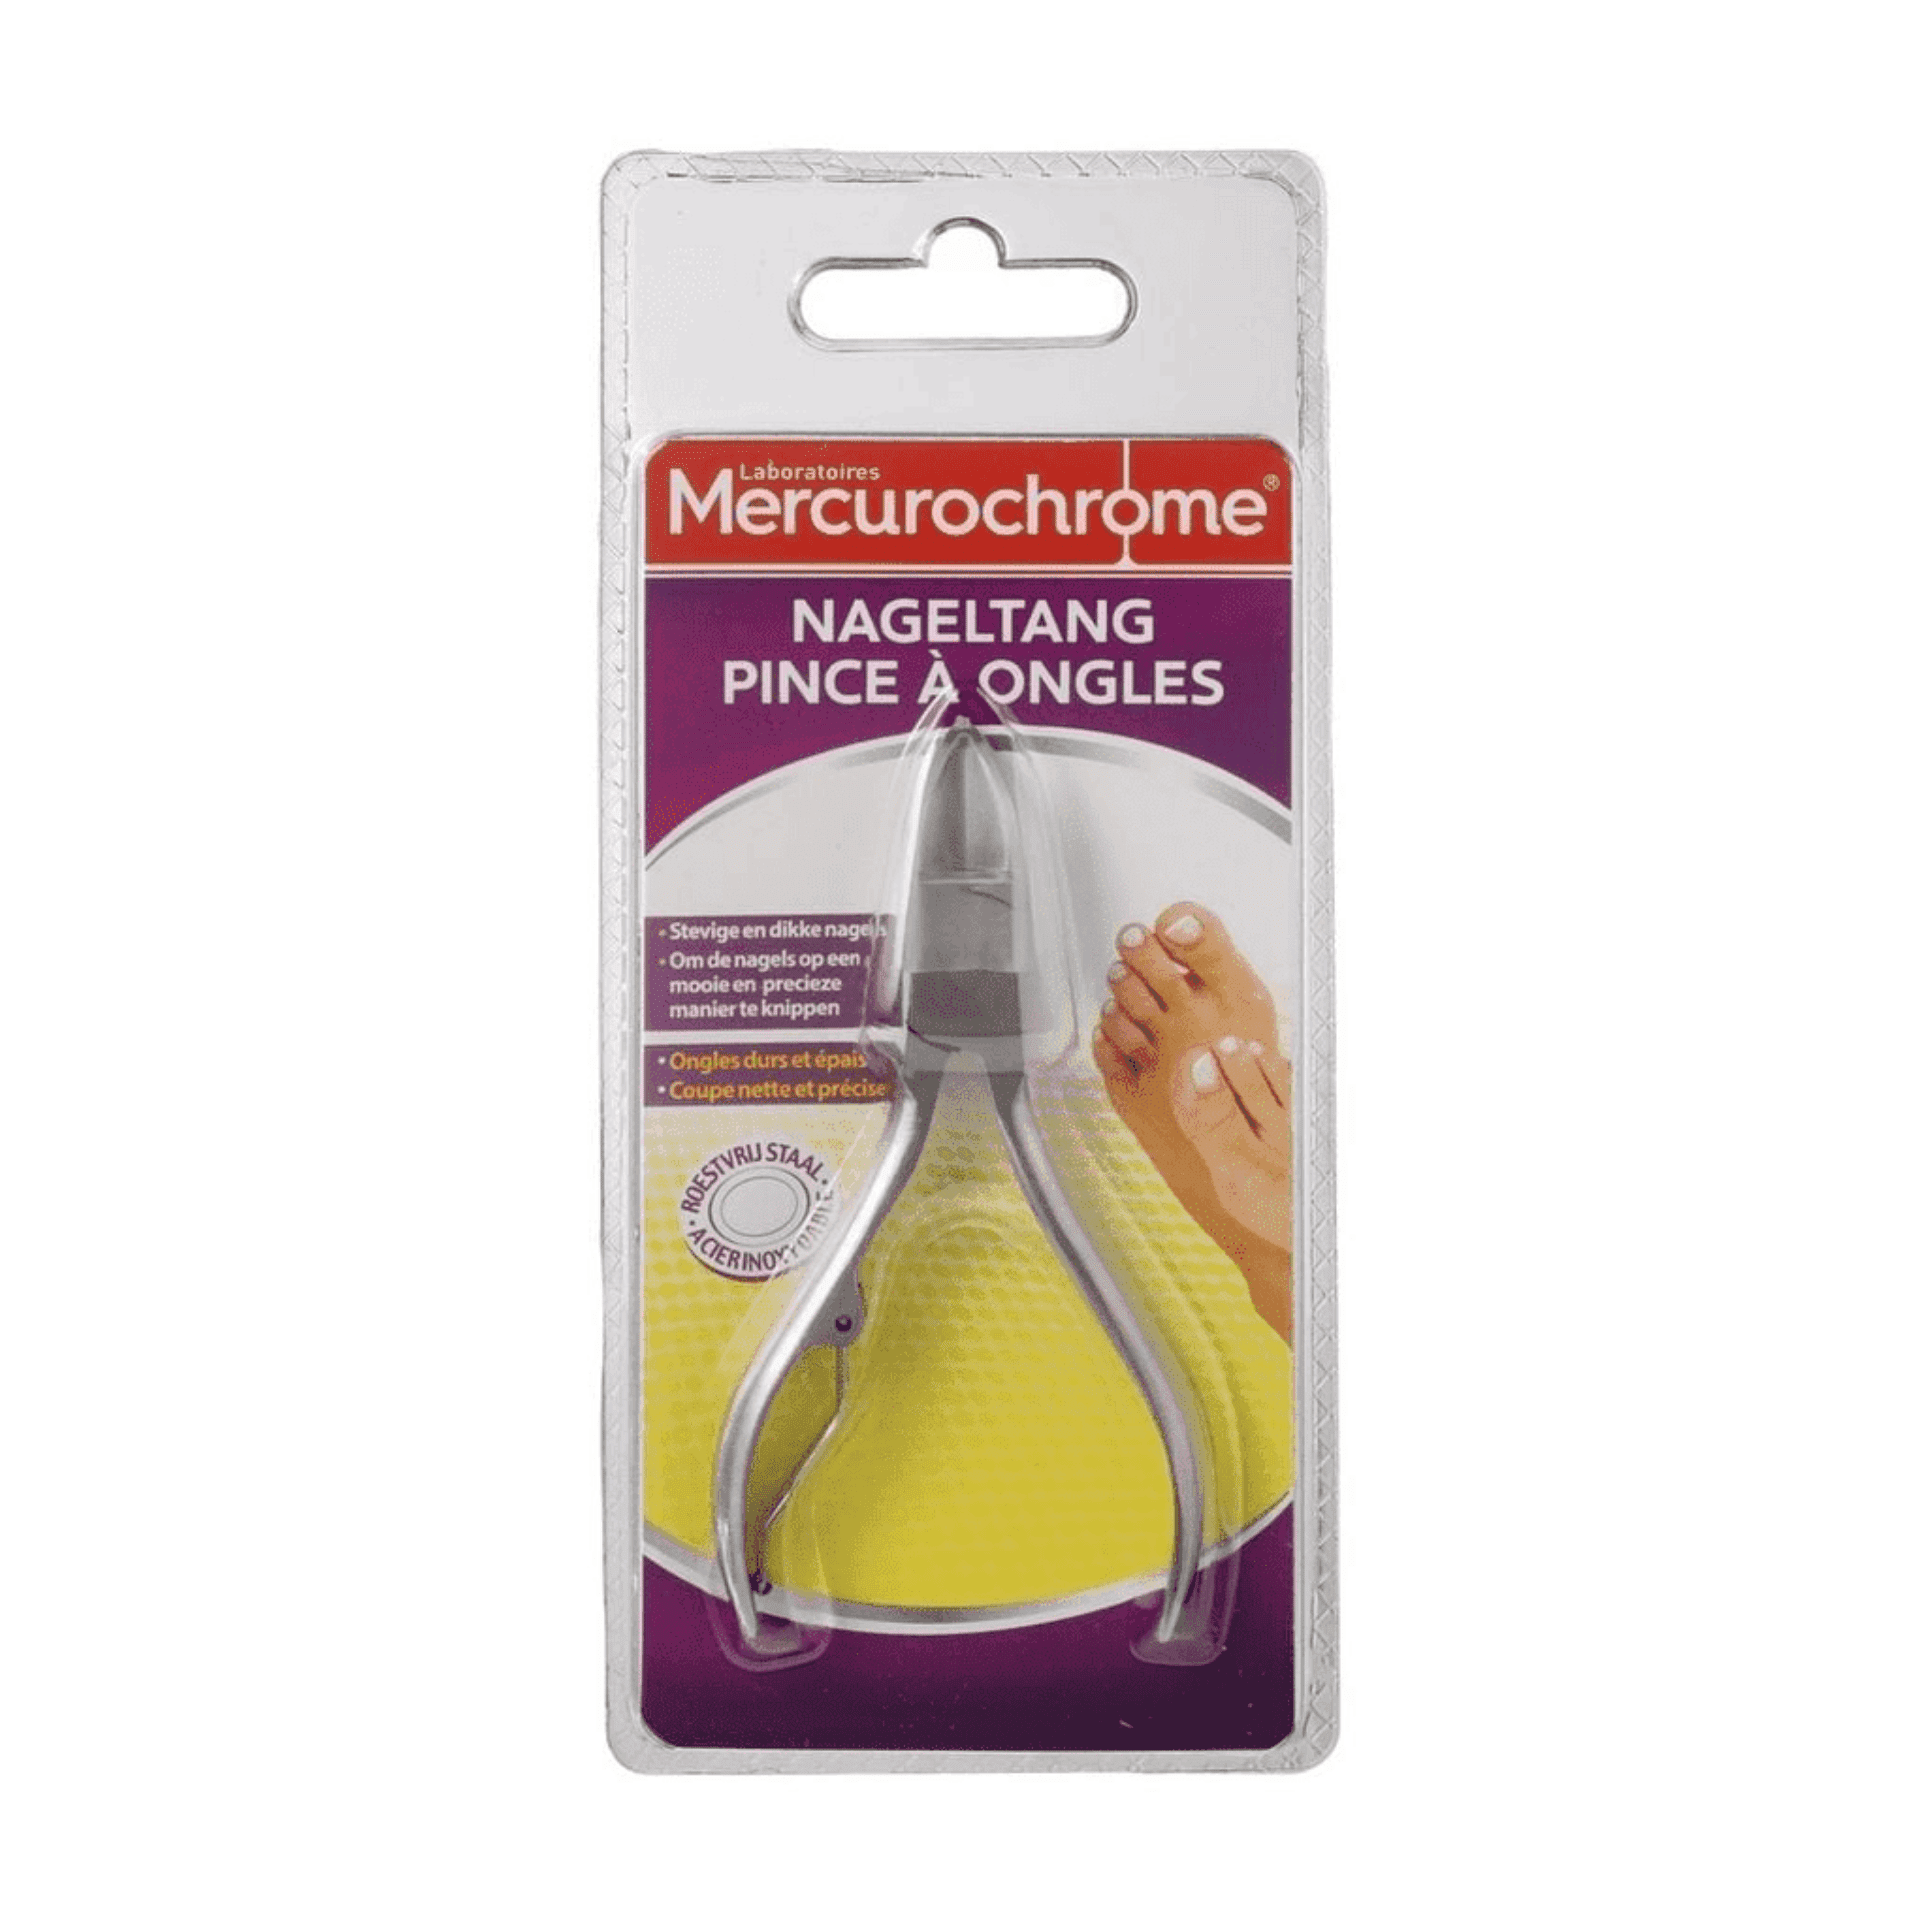 Coupe-ongles Mercurochrome 1 pièce